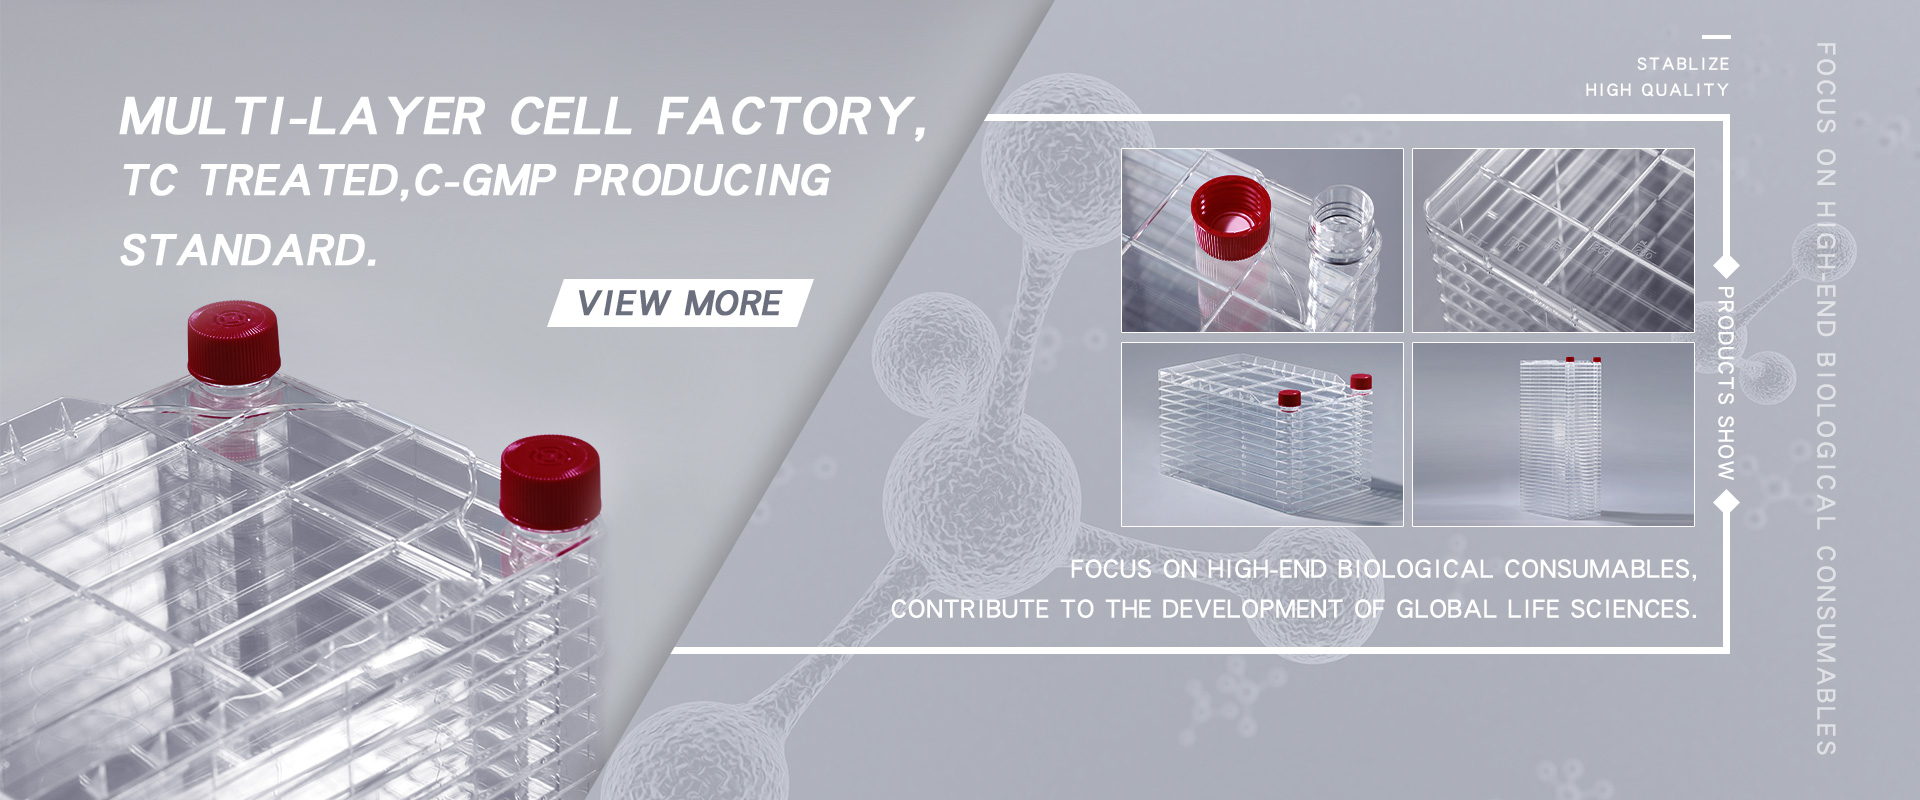 Muti-layer cell factory